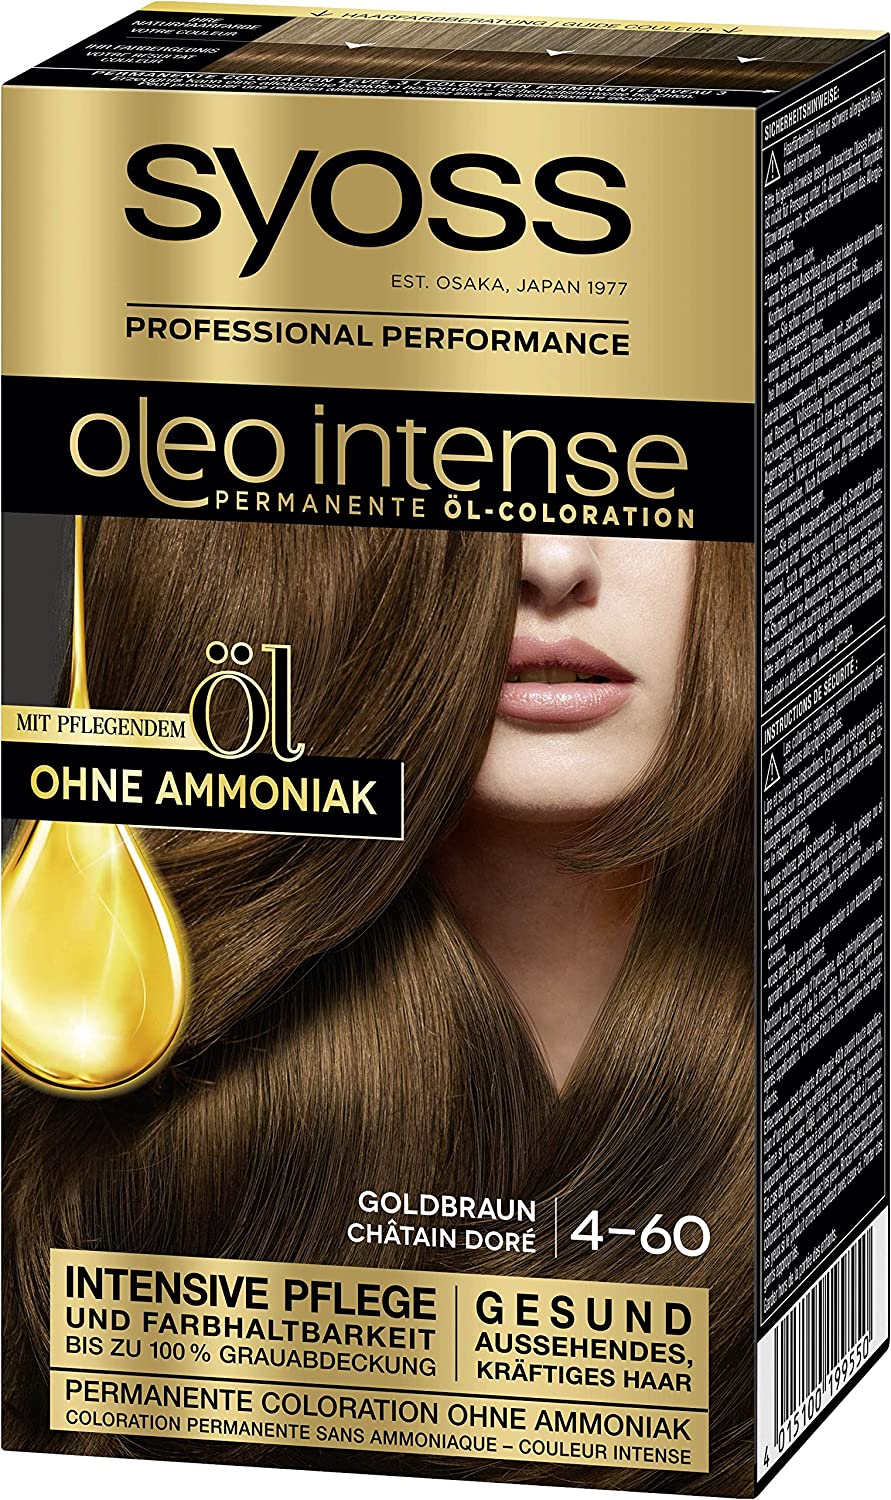 Syoss Oleo Intense Permanent Oil Colouration Hair Colour, 7-10 Natural Blonde with Nourishing Oil and Ammonia Free, Pack of 3 (3 x 115 ml), ‎natural